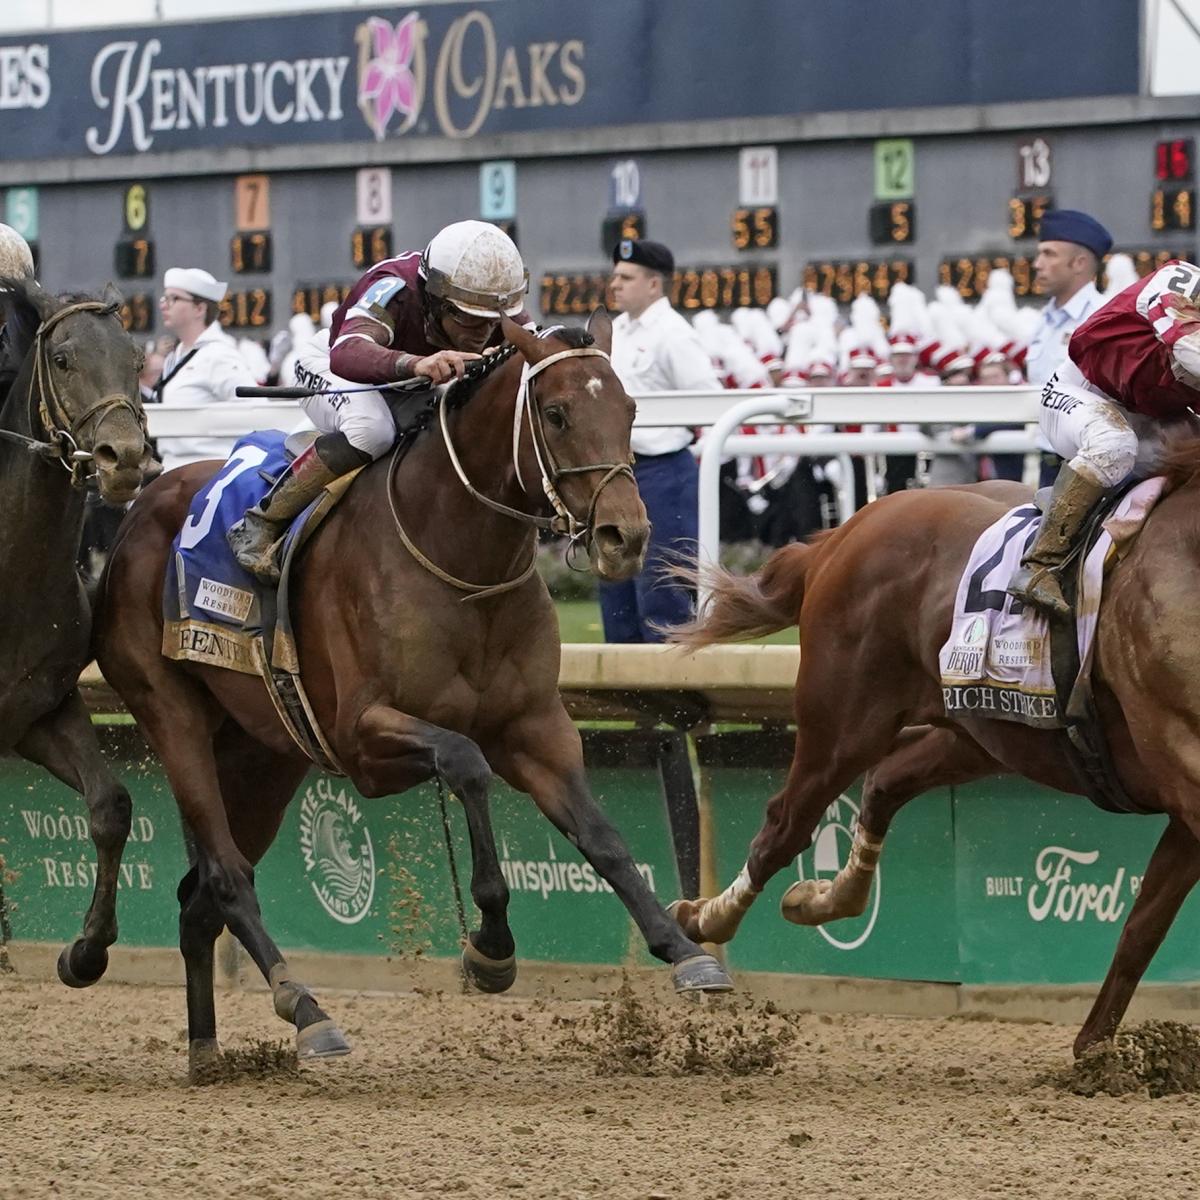 Preakness 2022 Post Positions Draw Start Time, Horses Lineup and More